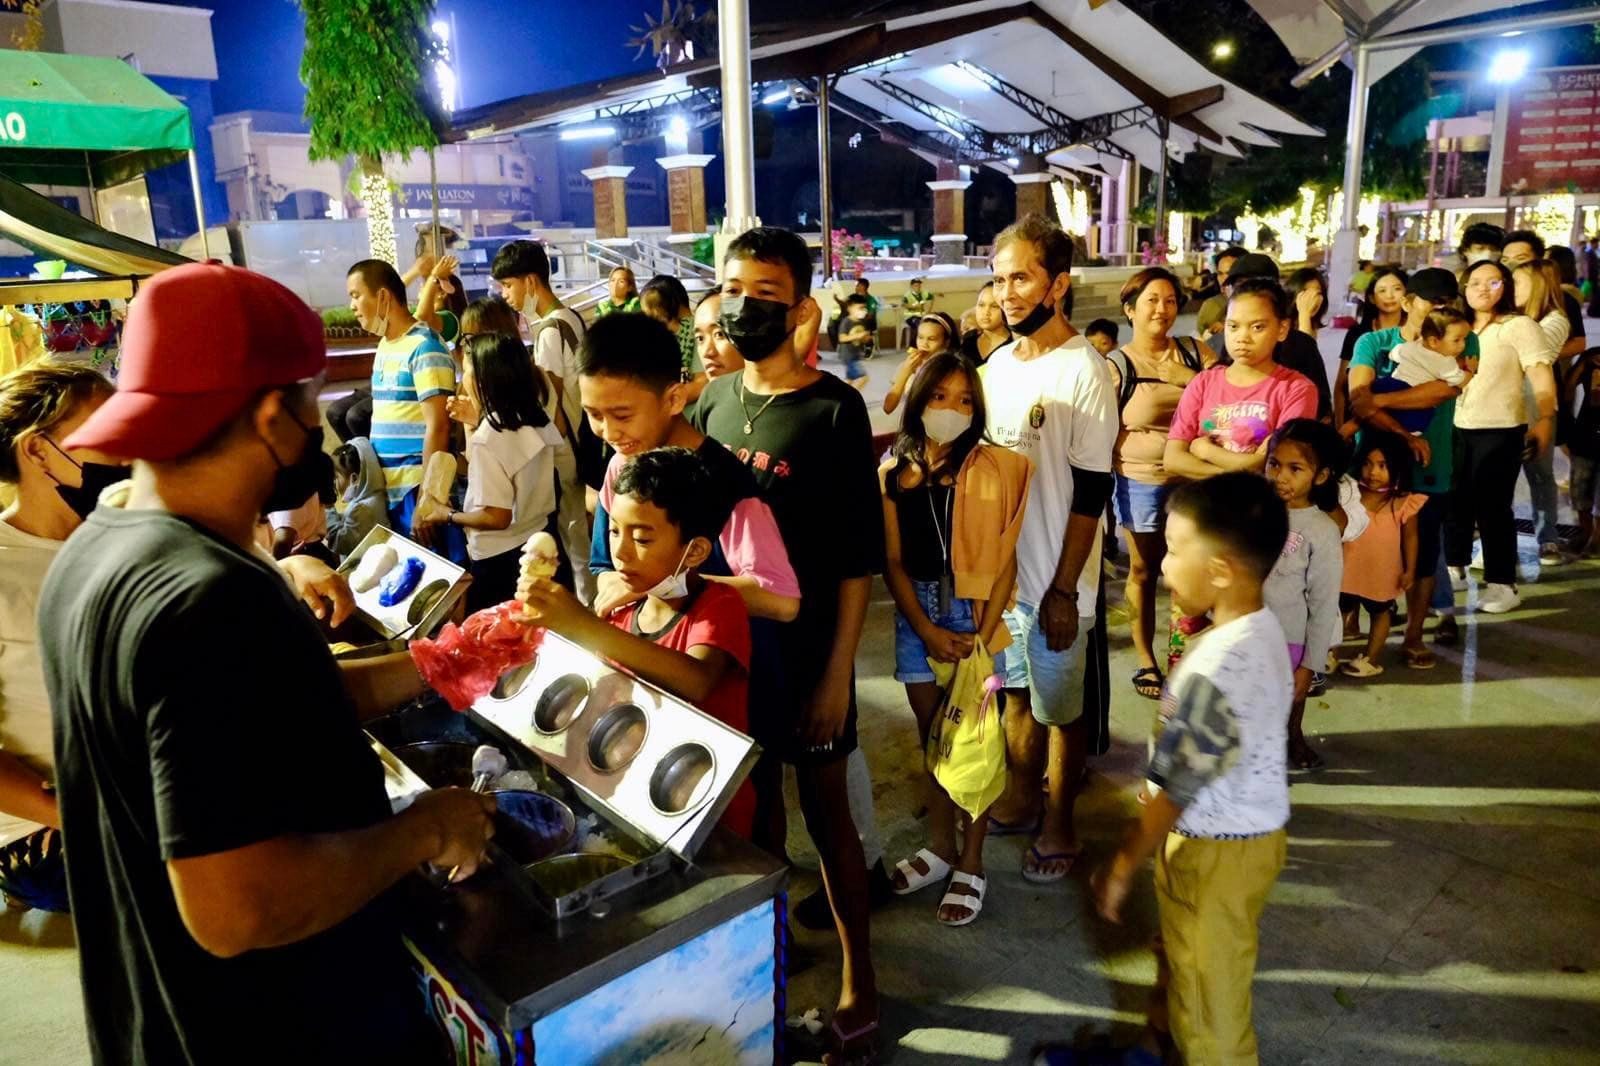 Davao treats parkgoers to lights, sounds, free food delights nightly